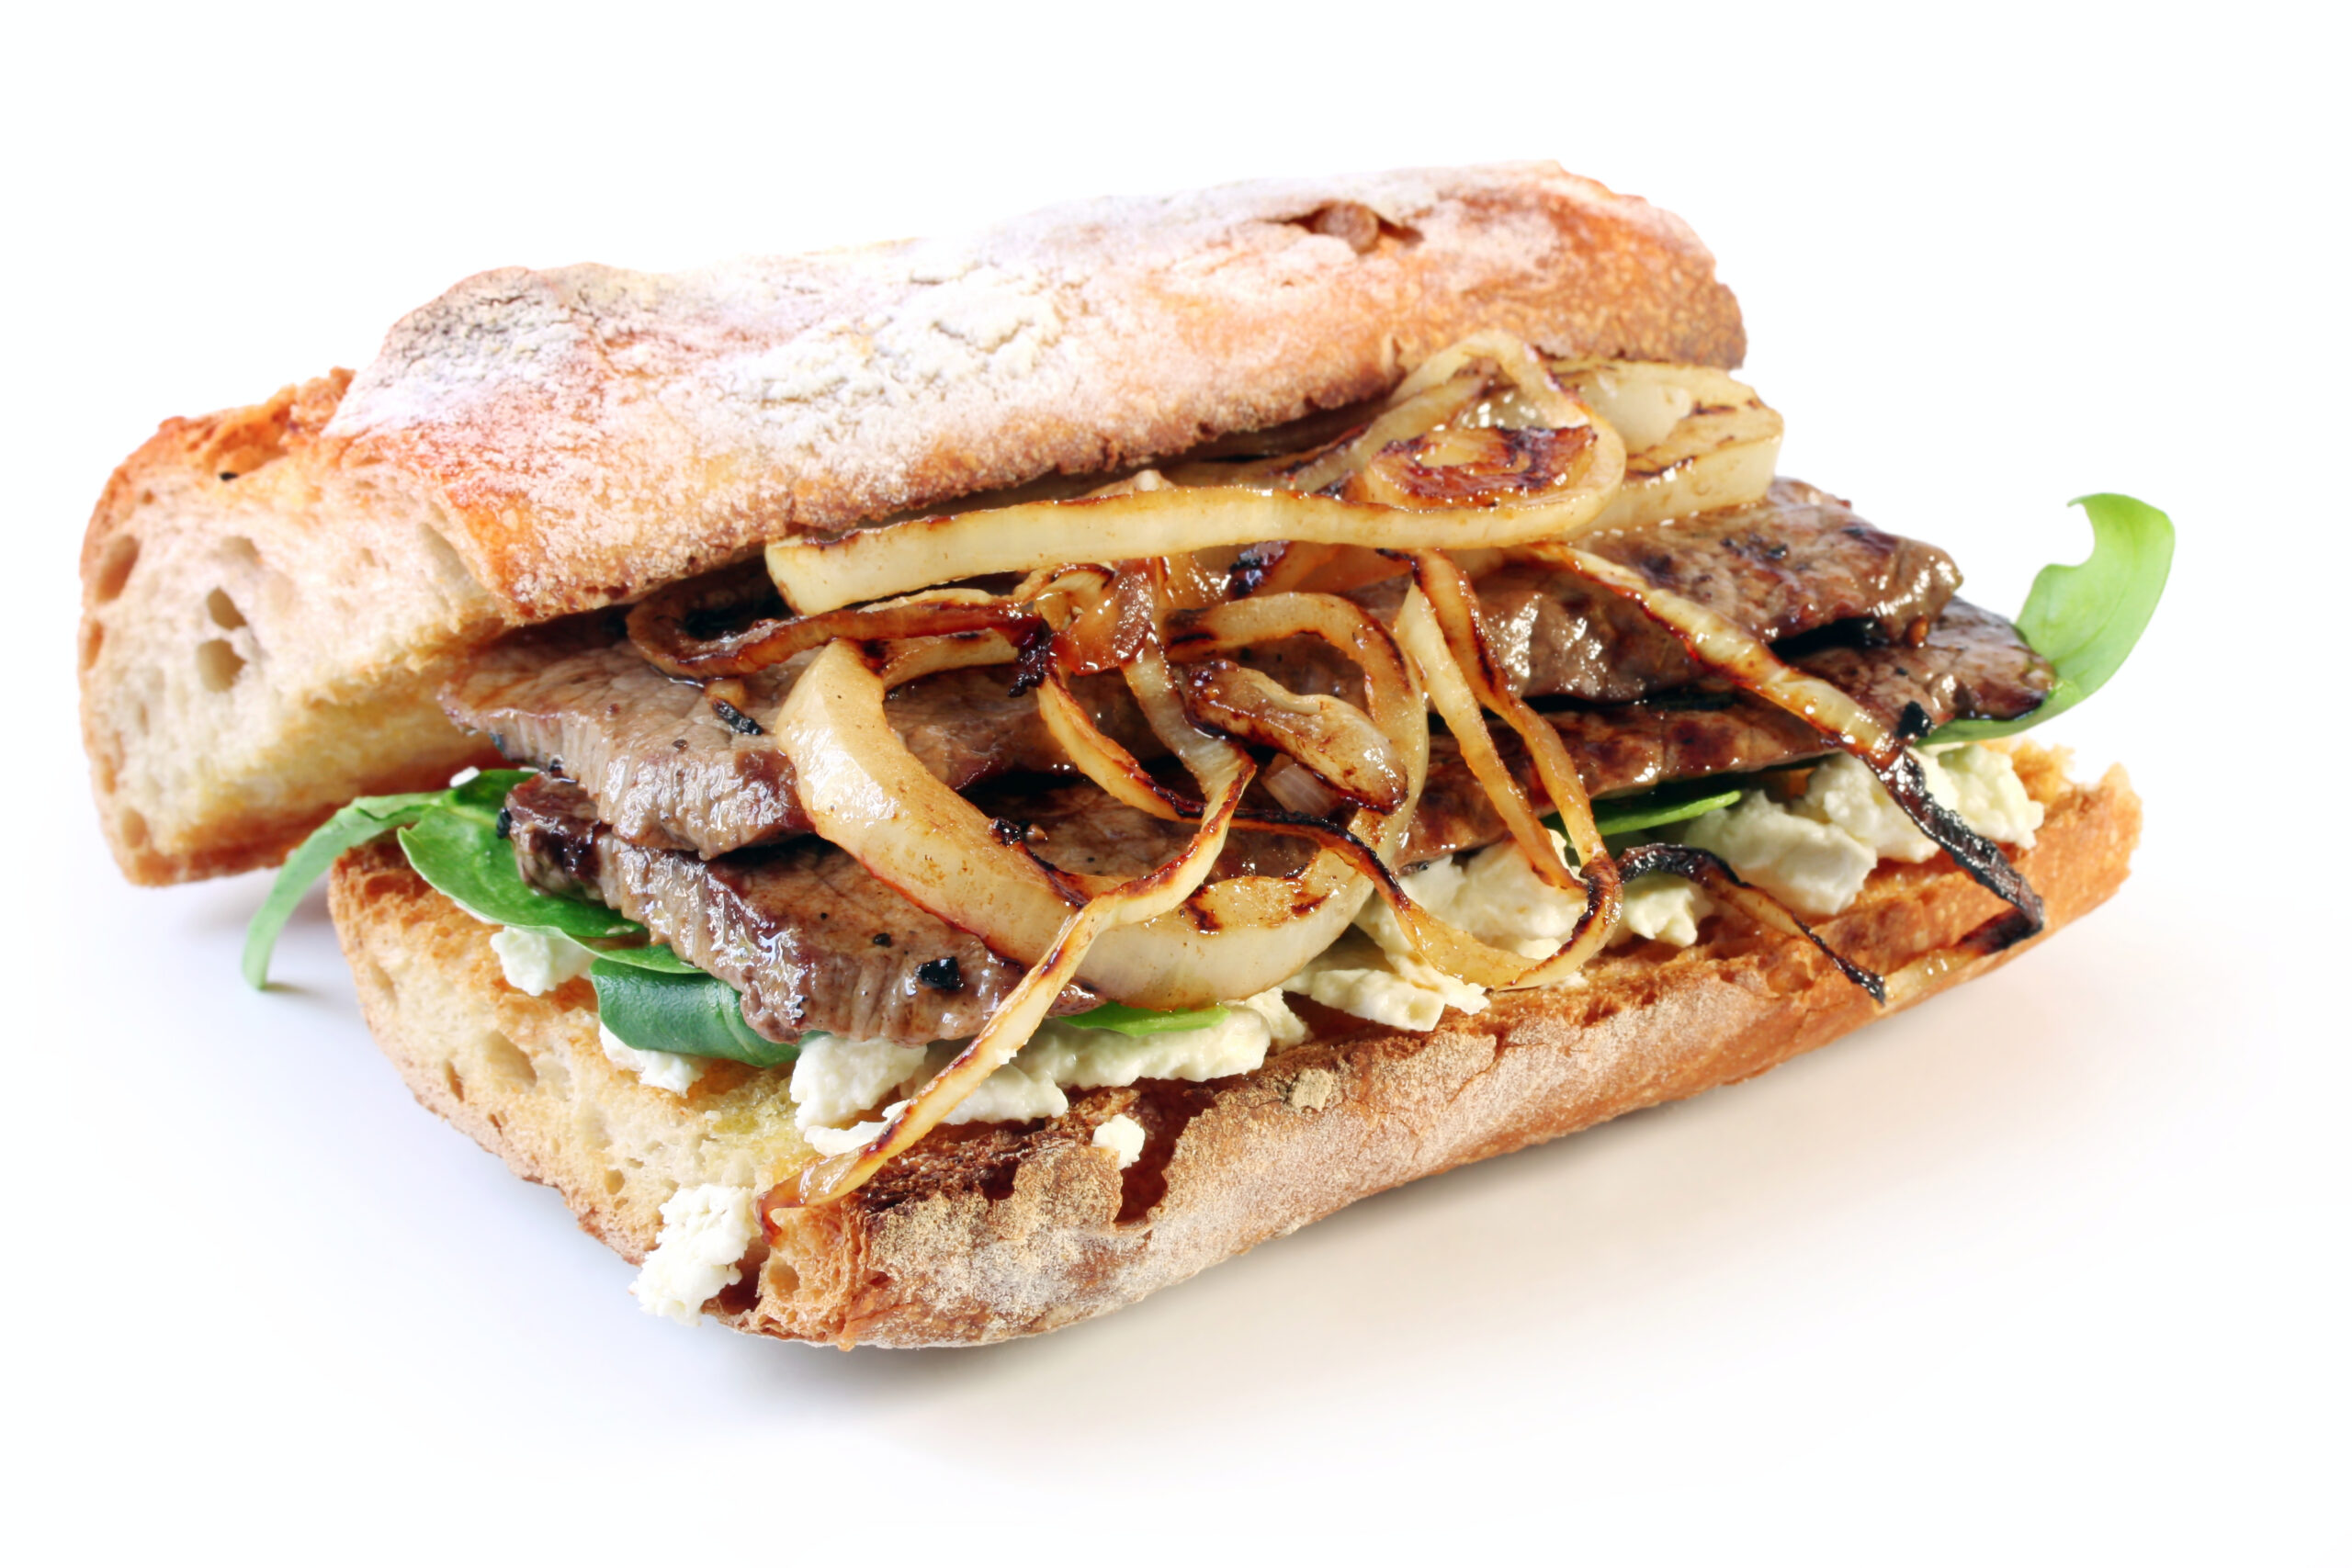 Steak sandwich.  Beef steak on a toasted baguette bread roll, with goat's cheese, spinach, and grilled onion.  Delicious!